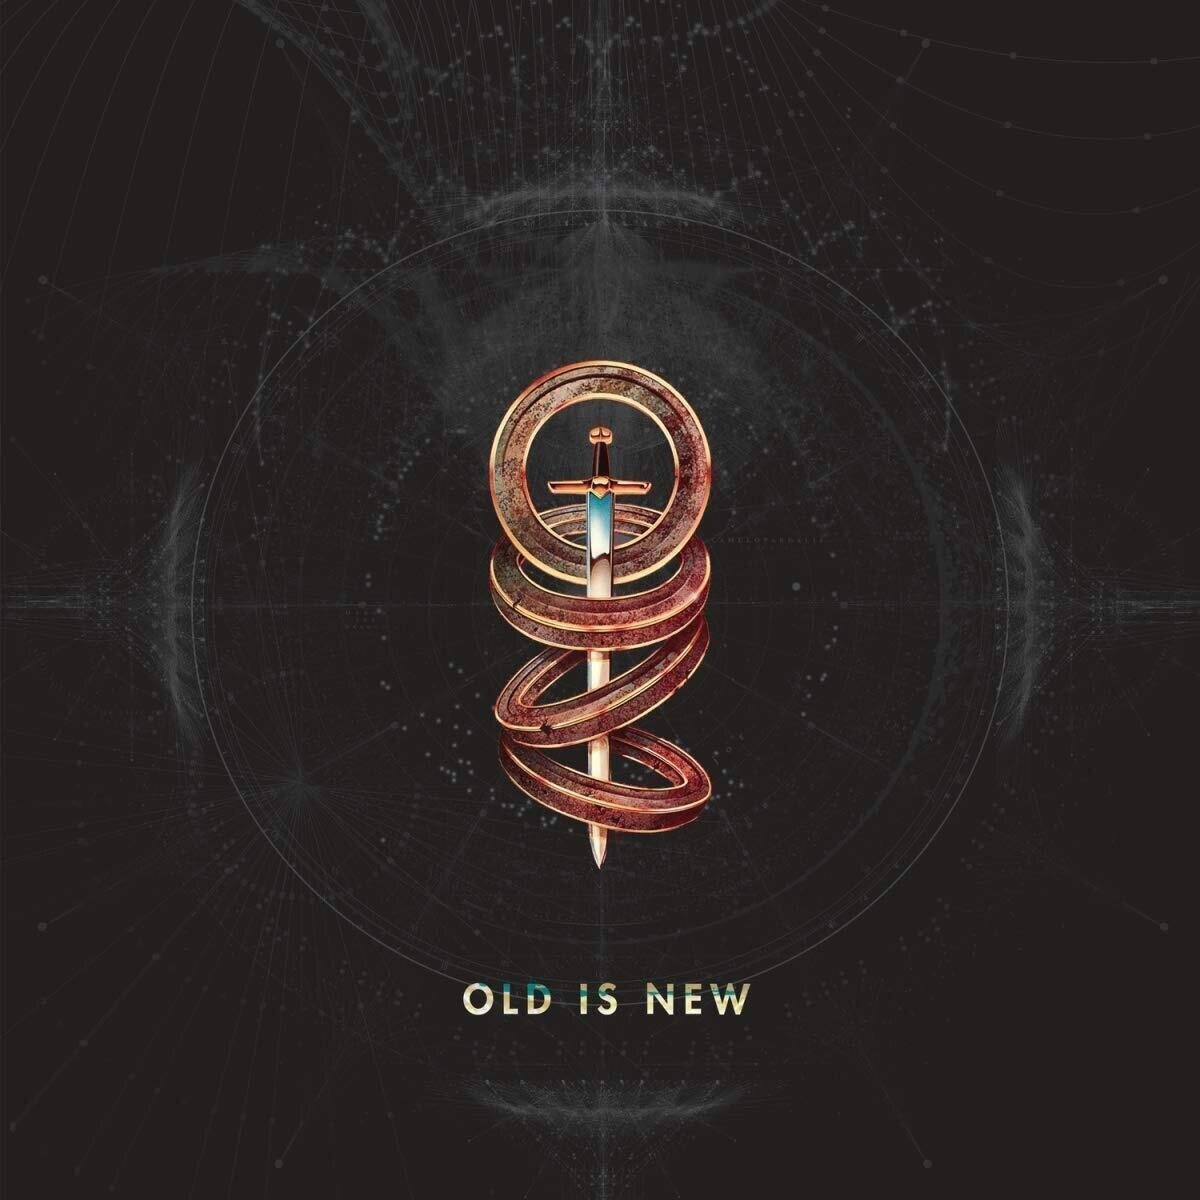 LP Toto - Old Is New (LP)